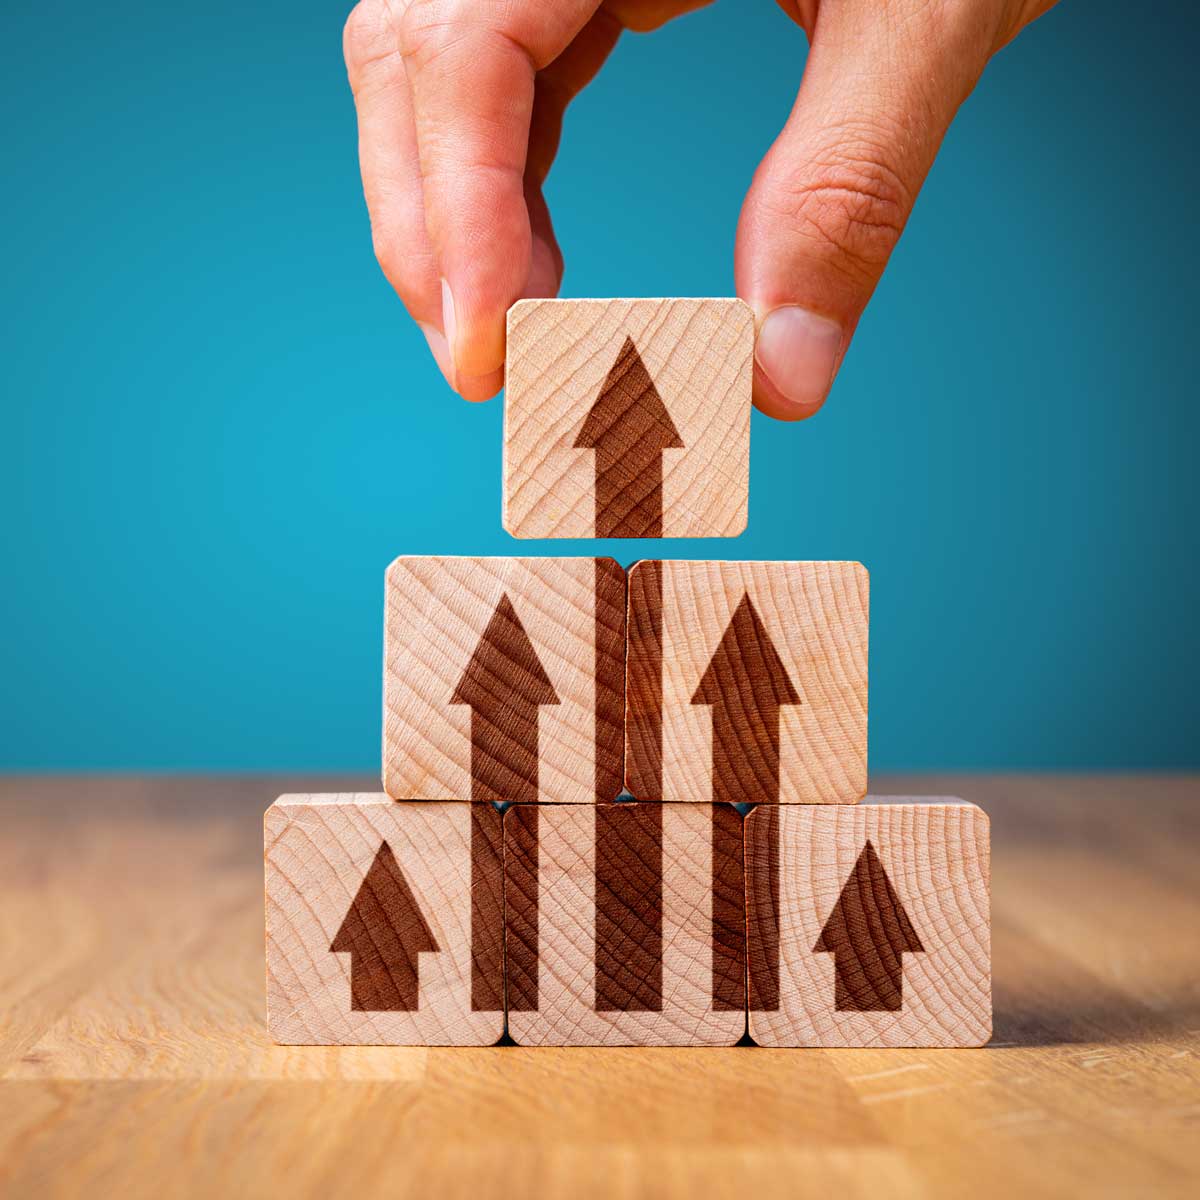 Business improvement, personal development and growth concept. Benchmarking concept. Wooden building blocks stacked on top of each other with arrows pointing upward; hand reaching for top block.